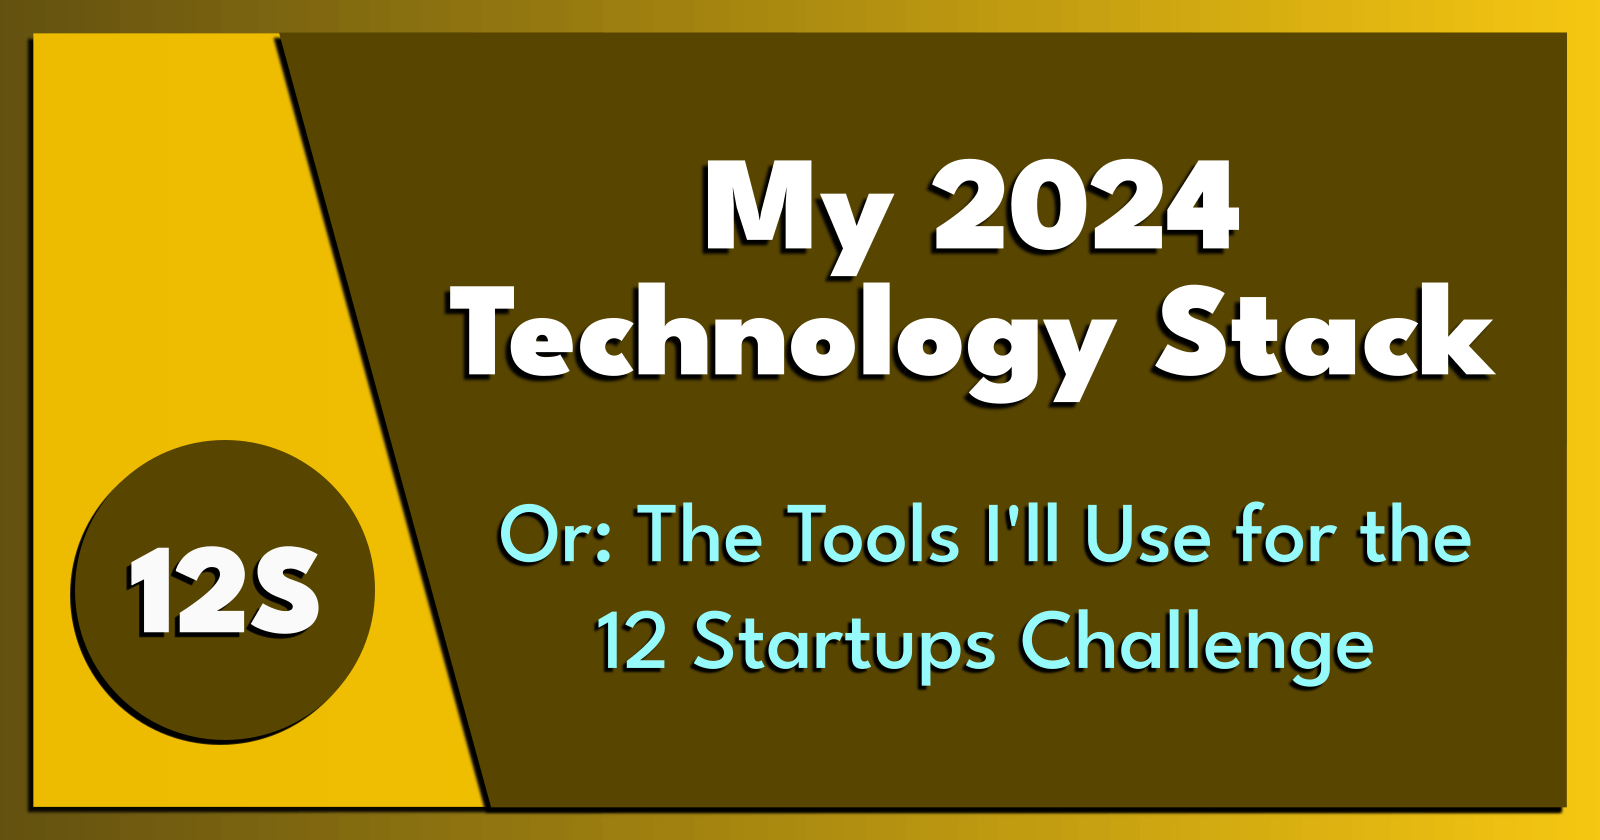 12S: My 2024 Technology Stack.